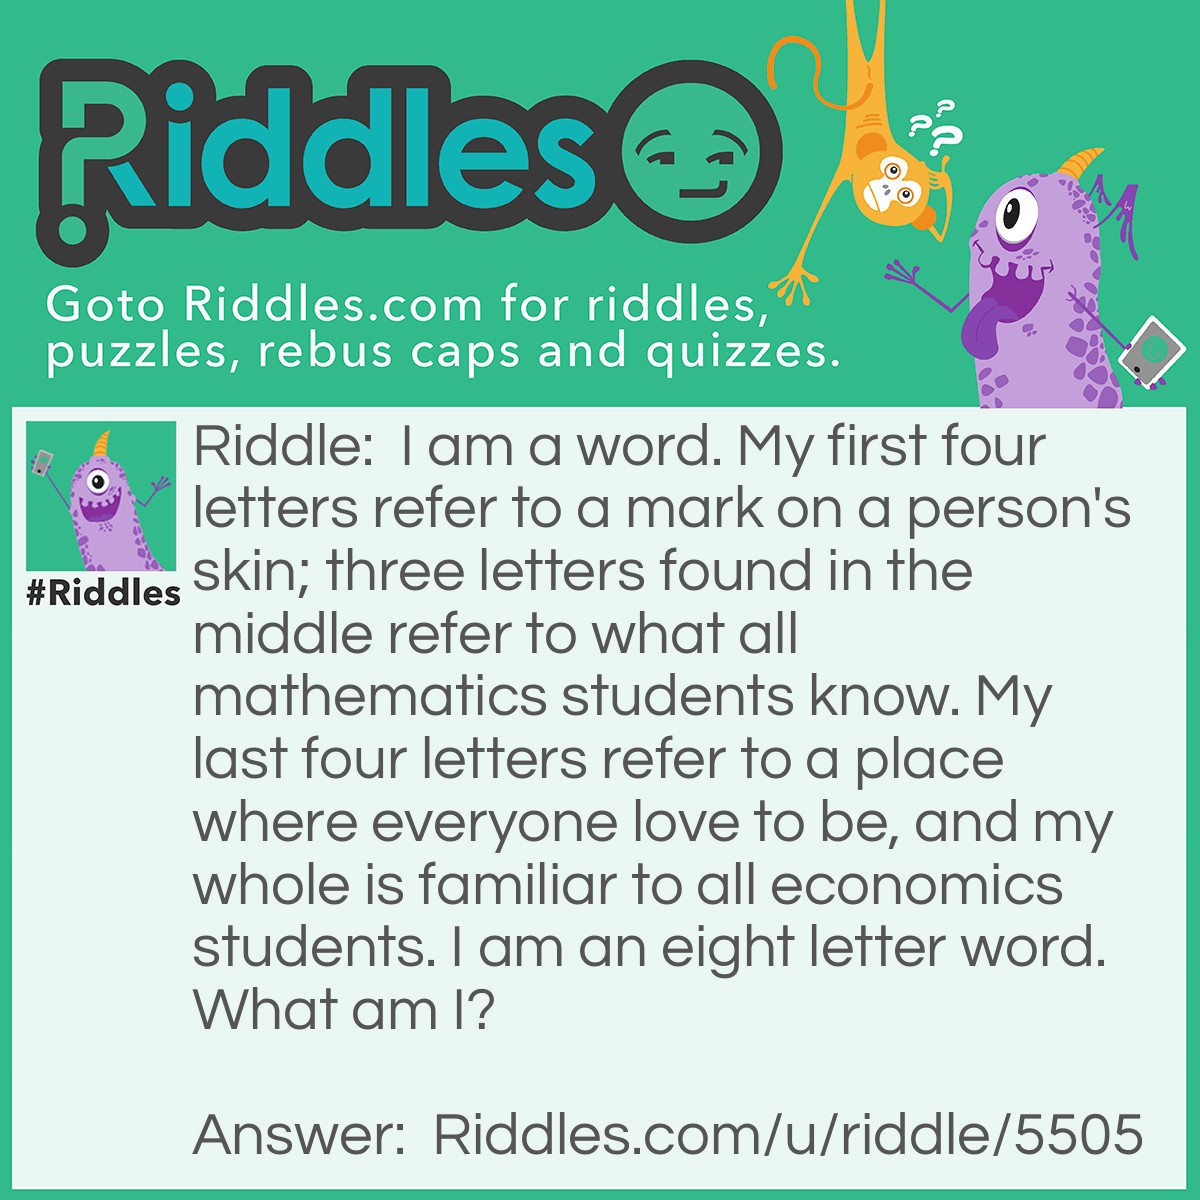 Riddle: I am a word. My first four letters refer to a mark on a person's skin; three letters found in the middle refer to what all mathematics students know. My last four letters refer to a place where everyone love to be, and my whole is familiar to all economics students. I am an eight letter word. What am I? Answer: Scarcity